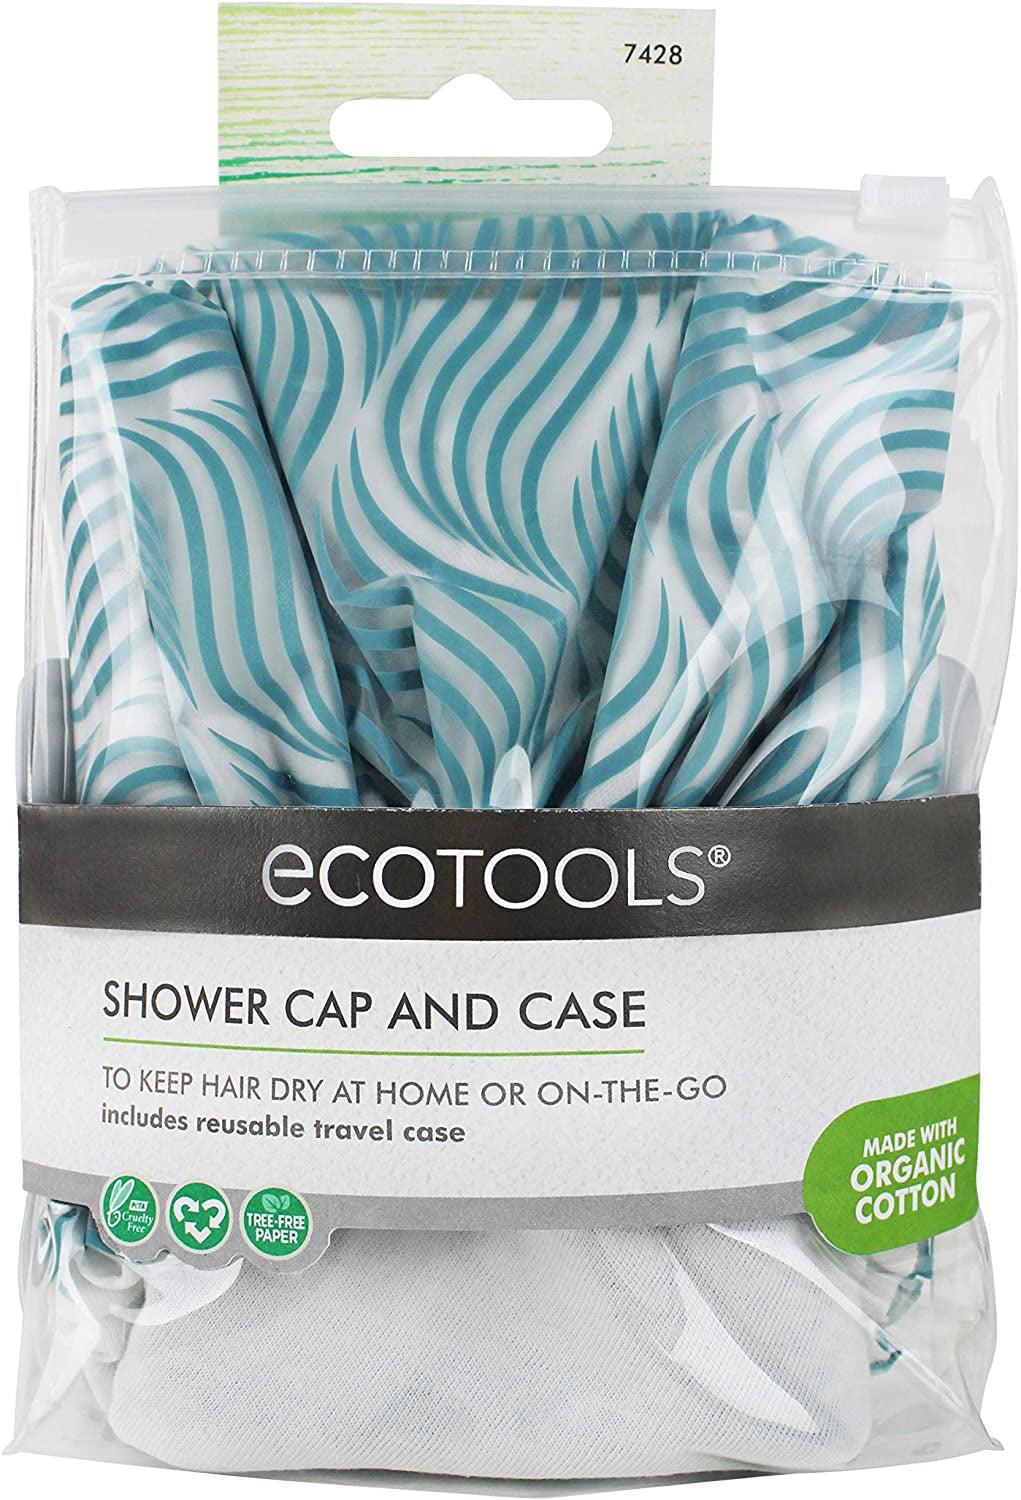 Ecotools Shower Cap and Case